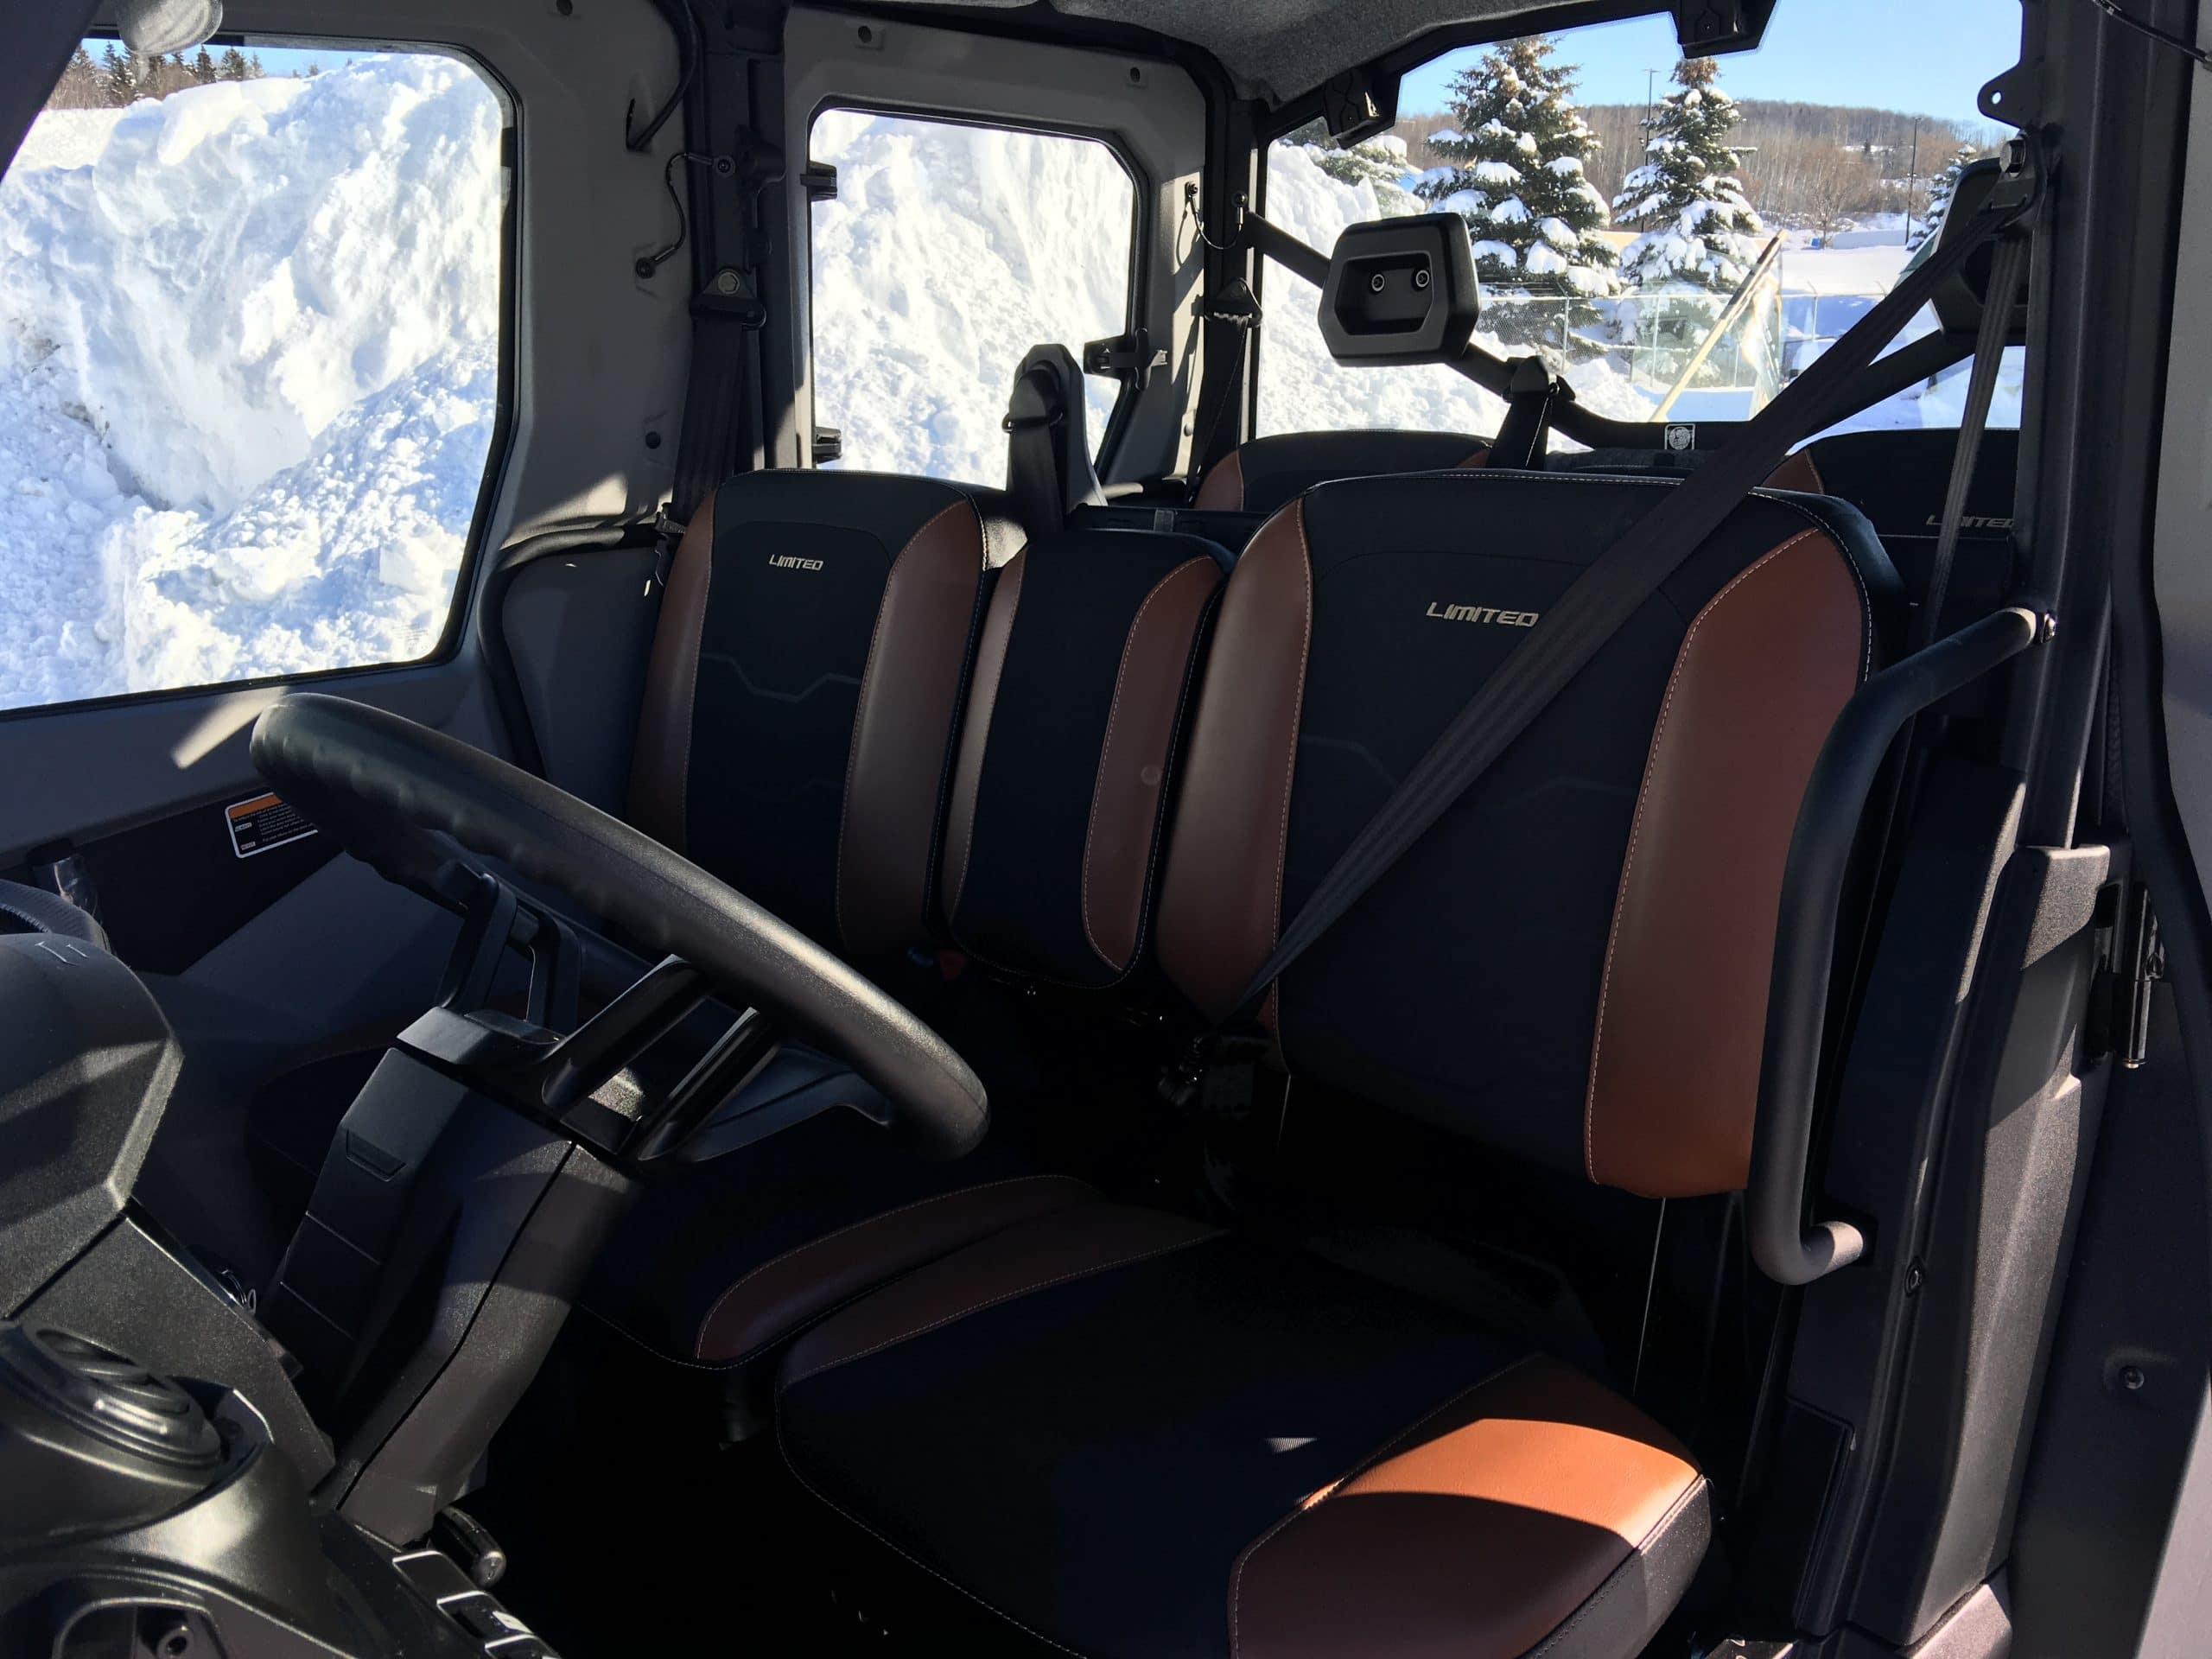 Meet The New Can Am Defender Limited 2020 And Machines - 2021 Can Am Defender Seat Covers